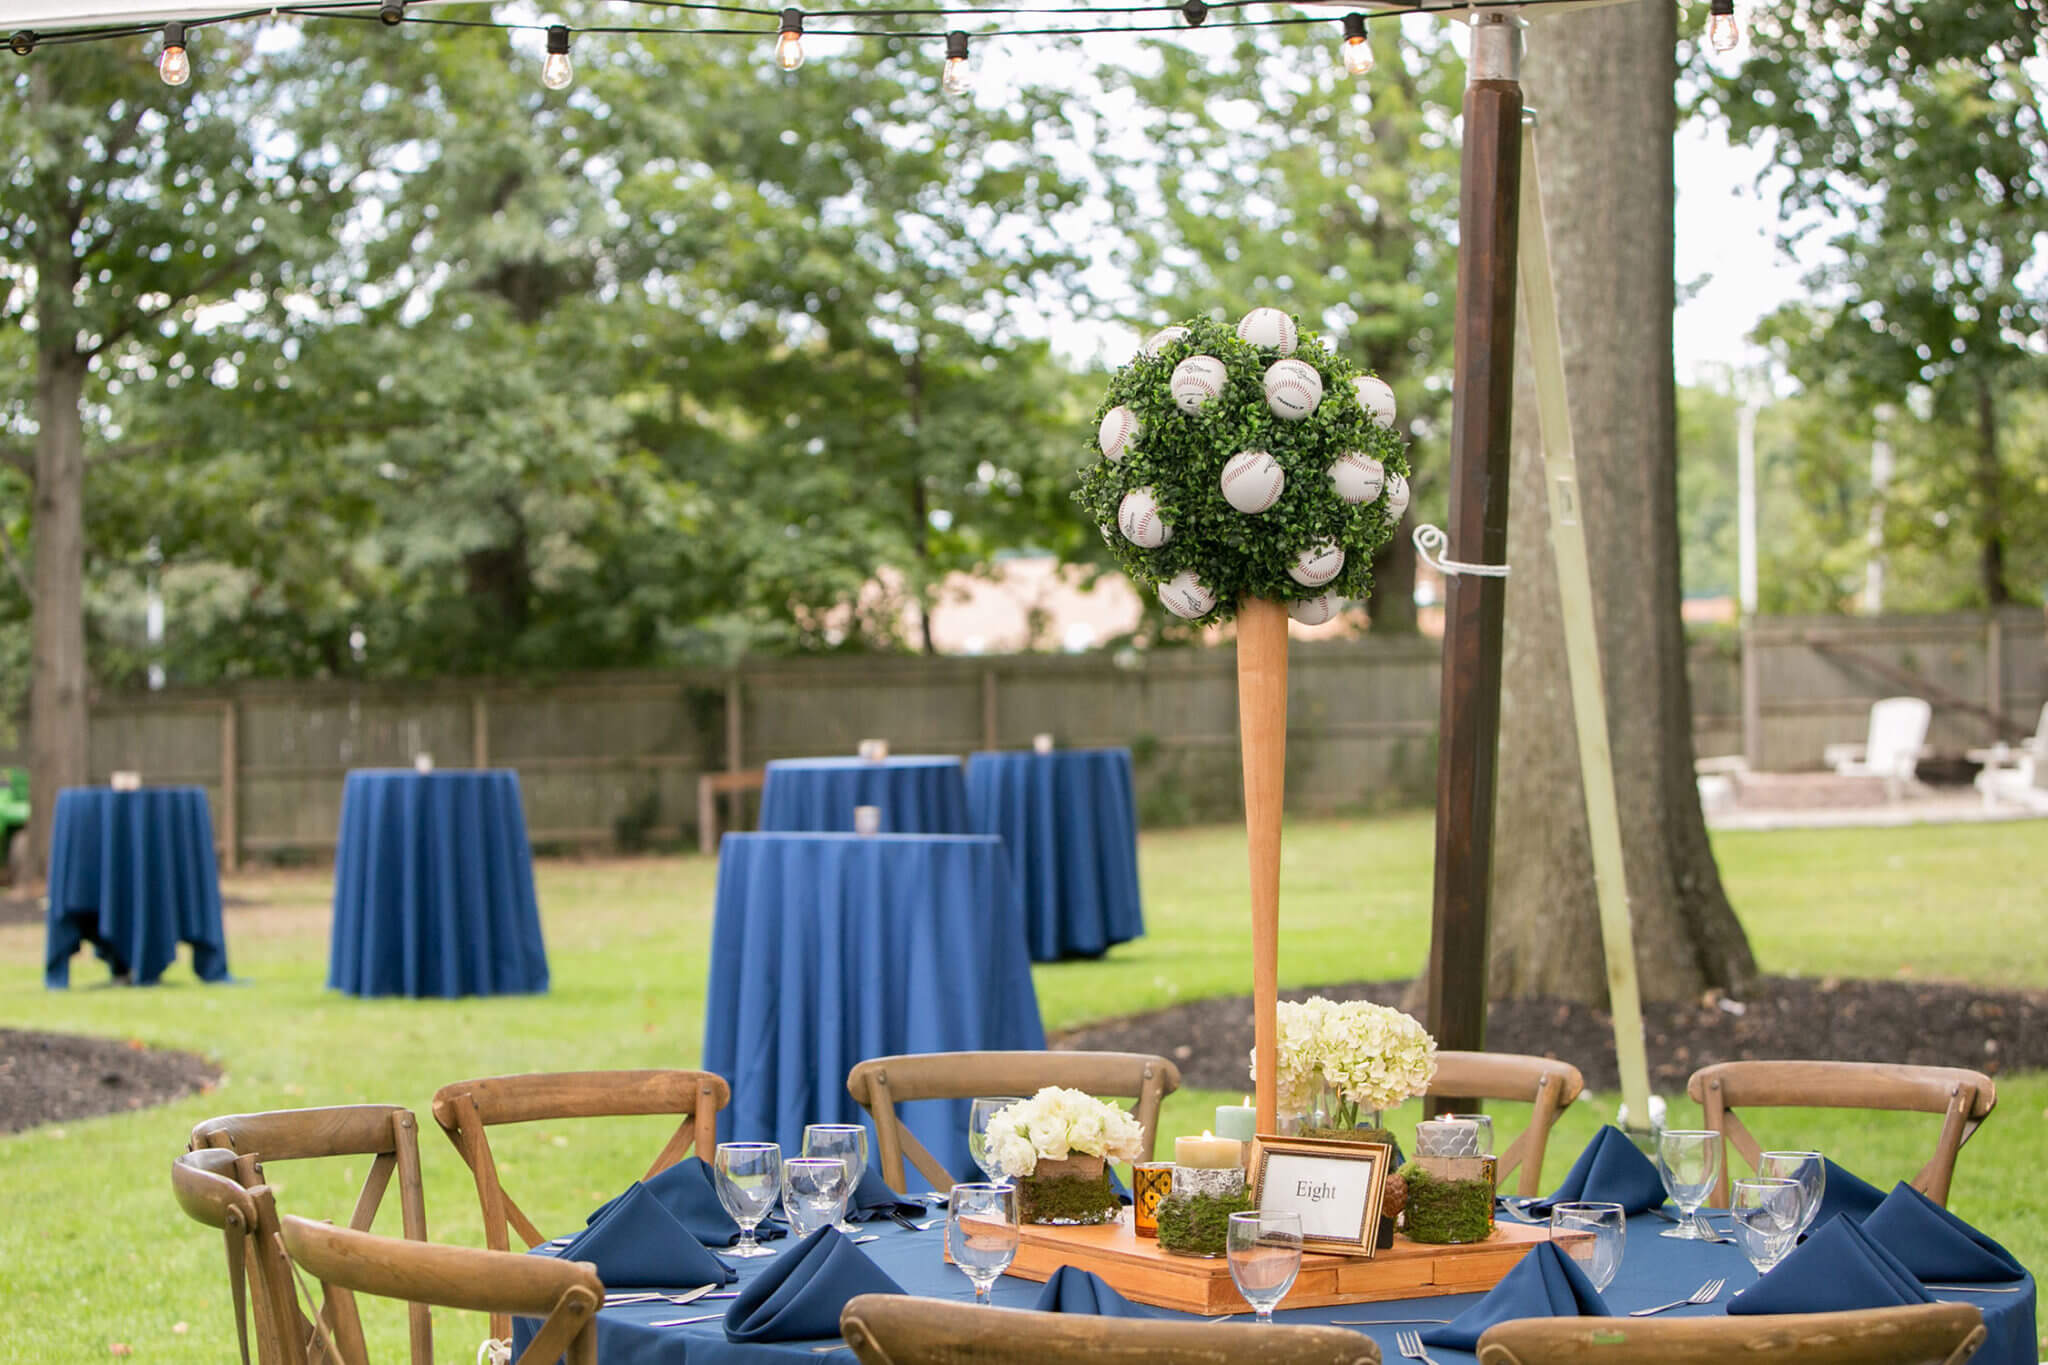 Outdoor wedding reception setup with blue tablecloths, wooden chairs, and hanging lights, decorated with white floral arrangements.